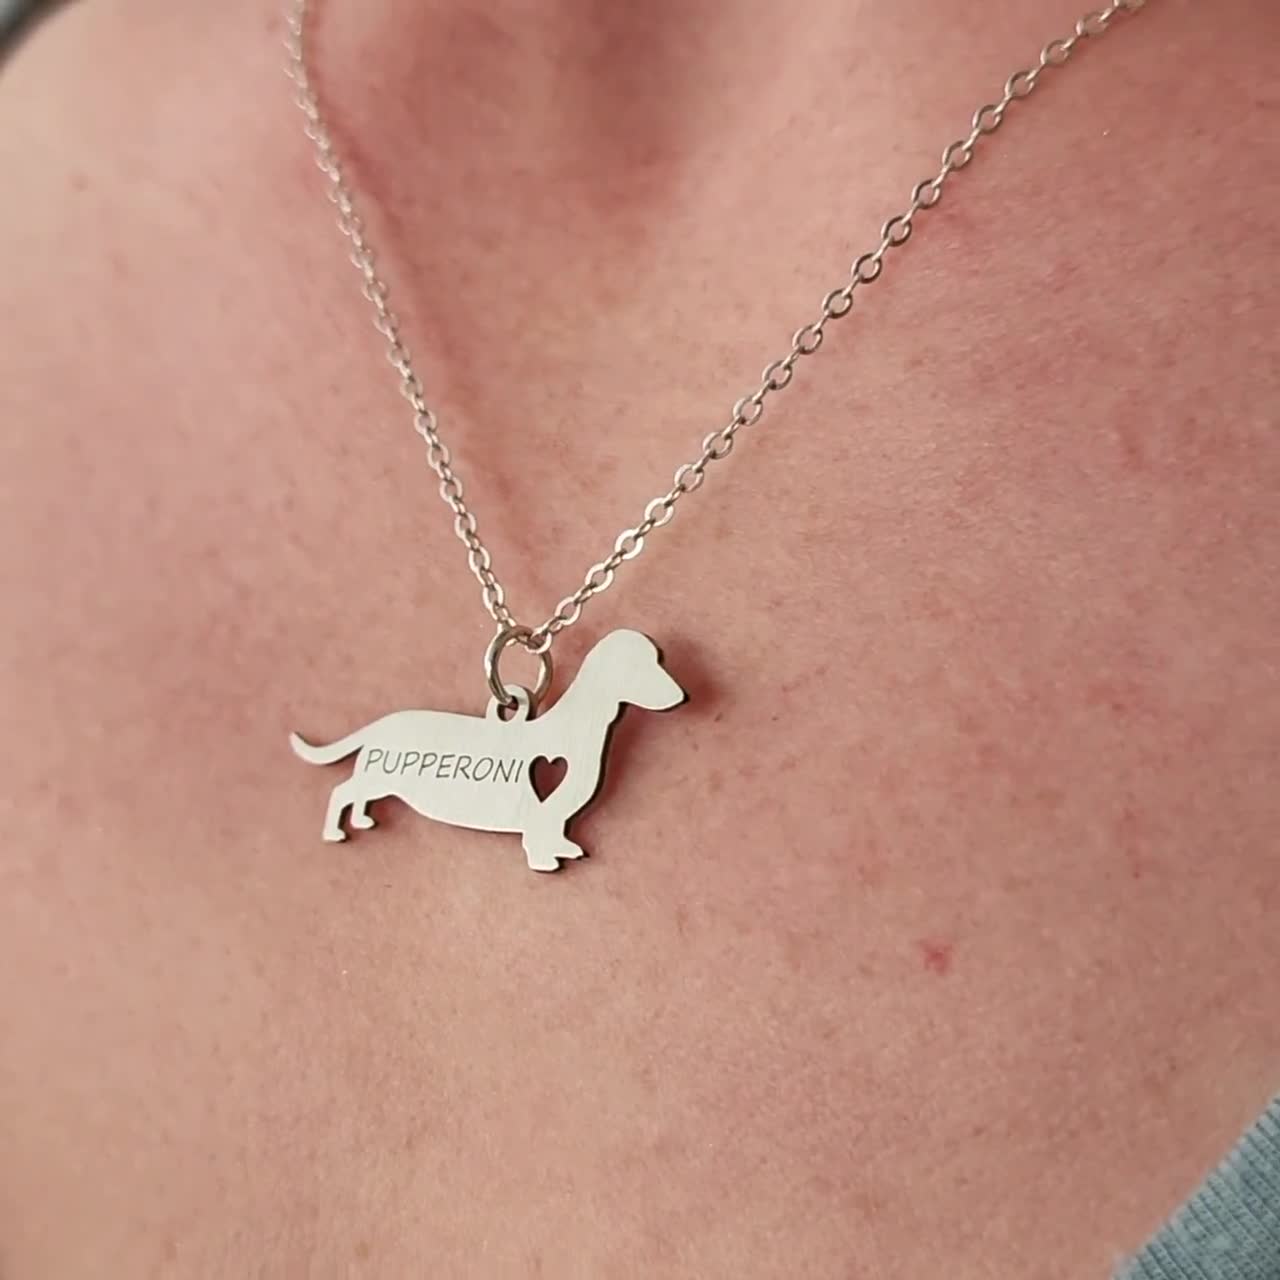 J'ADMIRE 14K Yellow Gold Plated Sterling Silver Dachshund Puppy Pendant  Necklace - 11QX7A